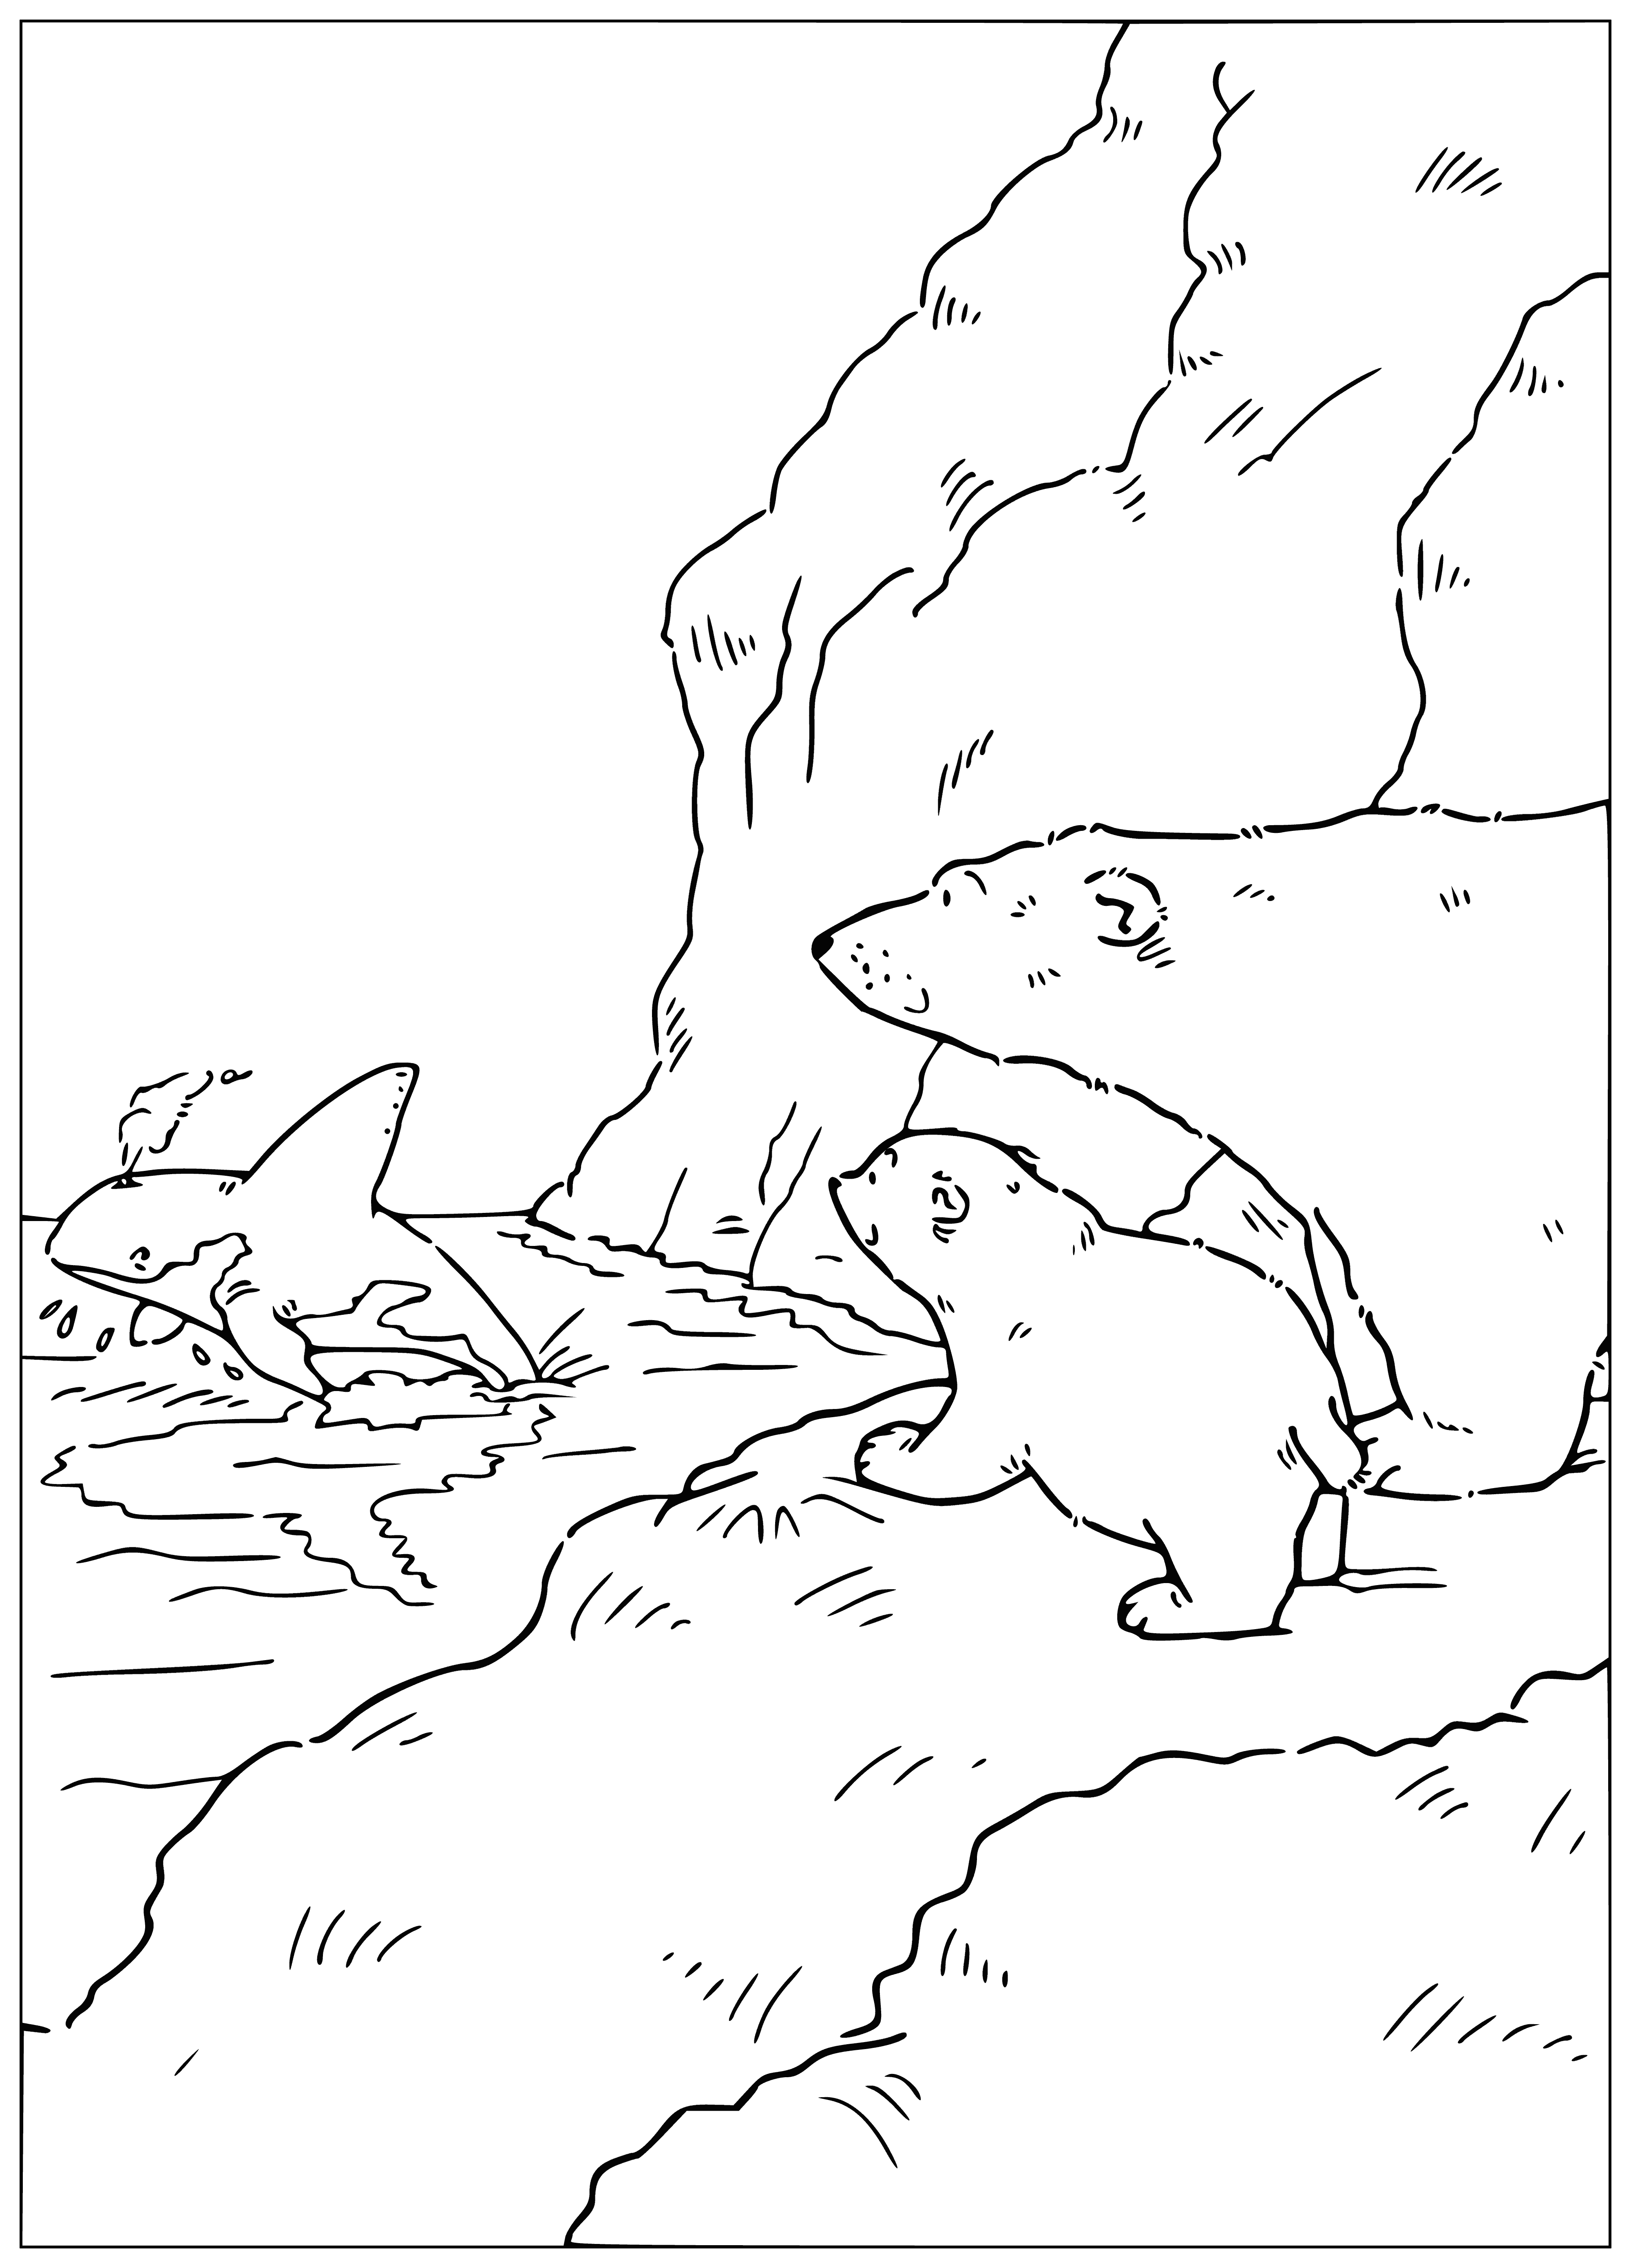 coloring page: Small polar bear looks in awe at large killer whale, mouth open in amazement.